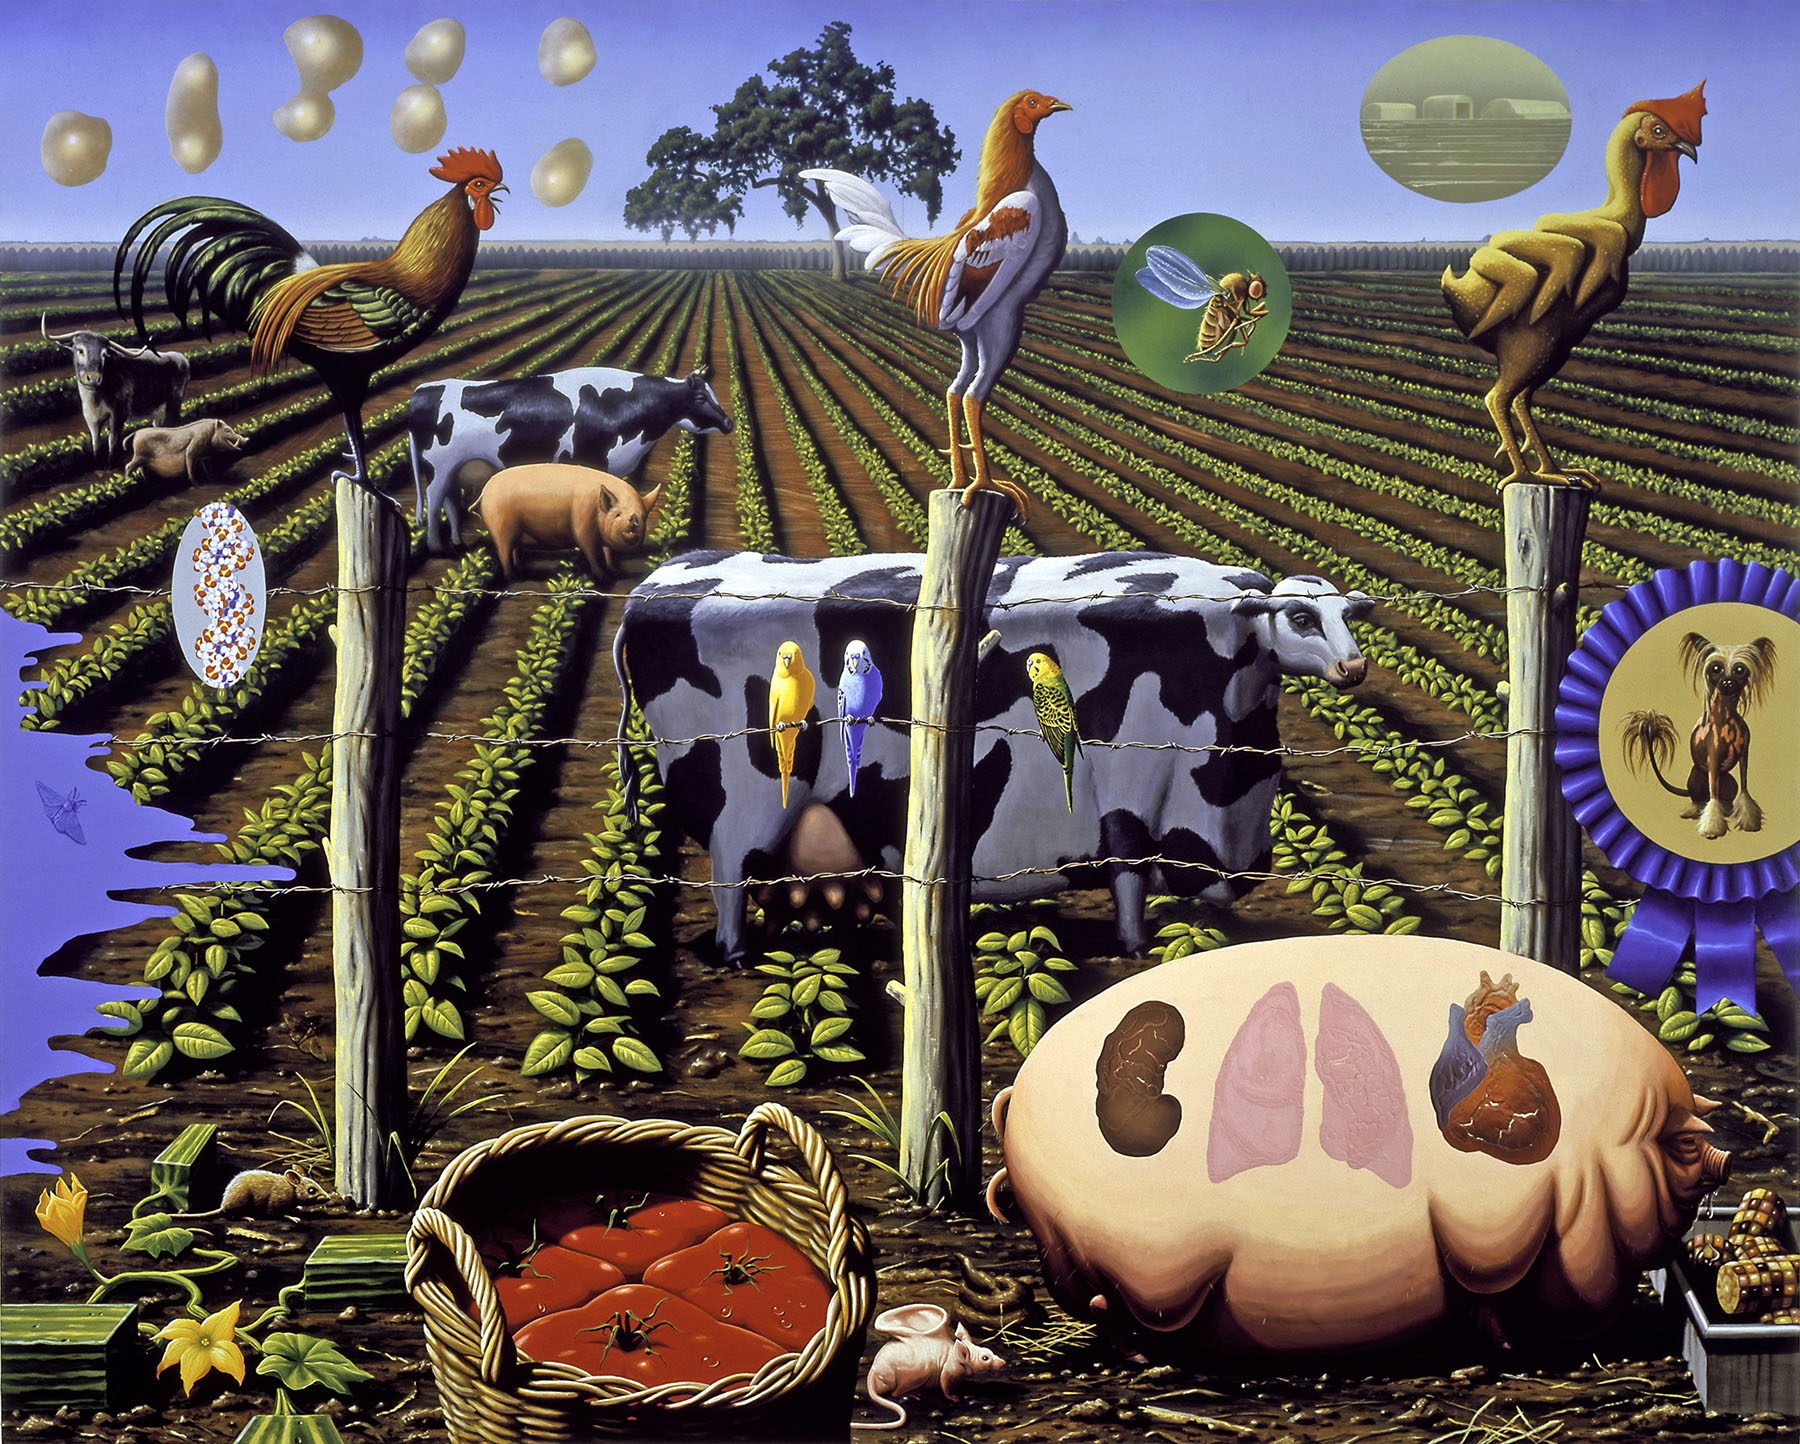 Alexis Rockman, <em>The Farm, </em>2000. Oil and acrylic on wood panel. 96 x 120 inches. ©2000 Alexis Rockman. Collection of Joy of Giving Something, Inc. NY. Courtesy of American Federation of Arts and The Bruce Museum.